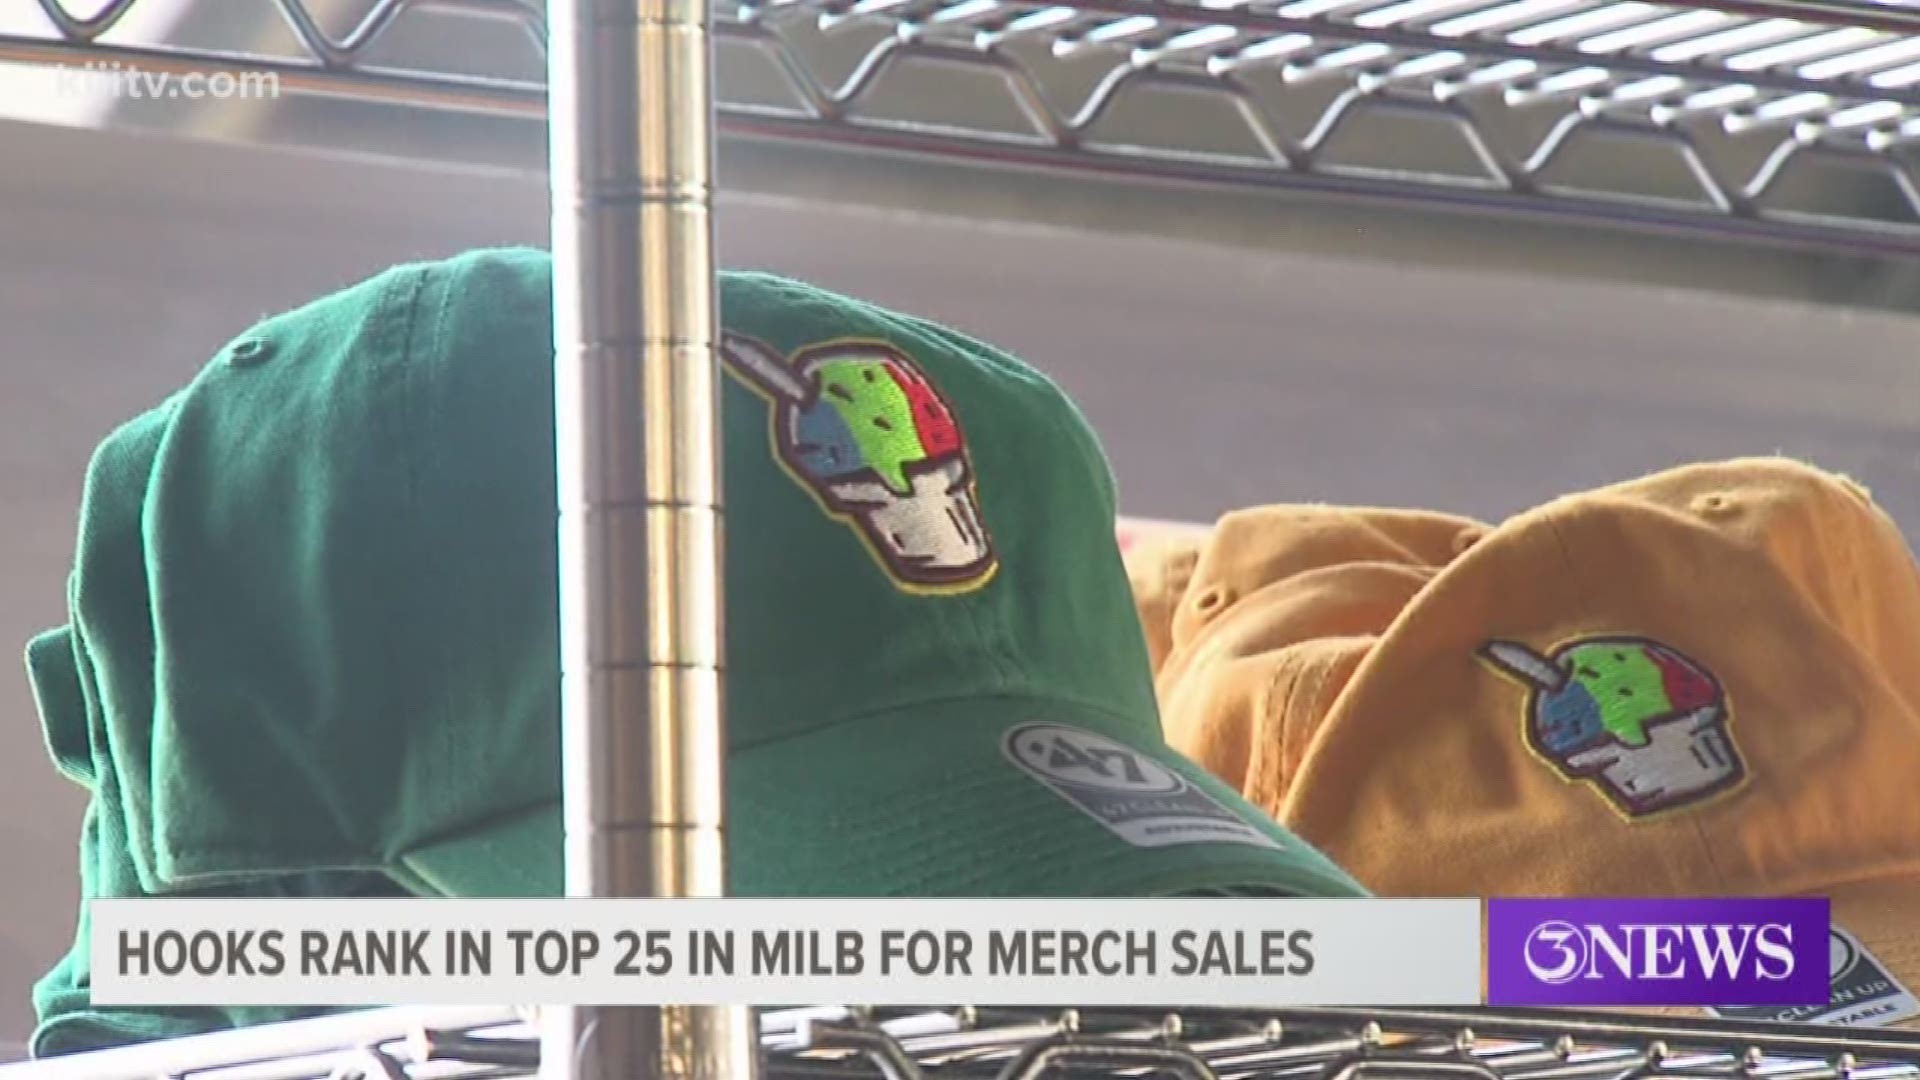 Minor League Baseball announced Wednesday its list of Top 25 teams in licensed merchandise sales for 2018 which featured Corpus Christi Hooks.